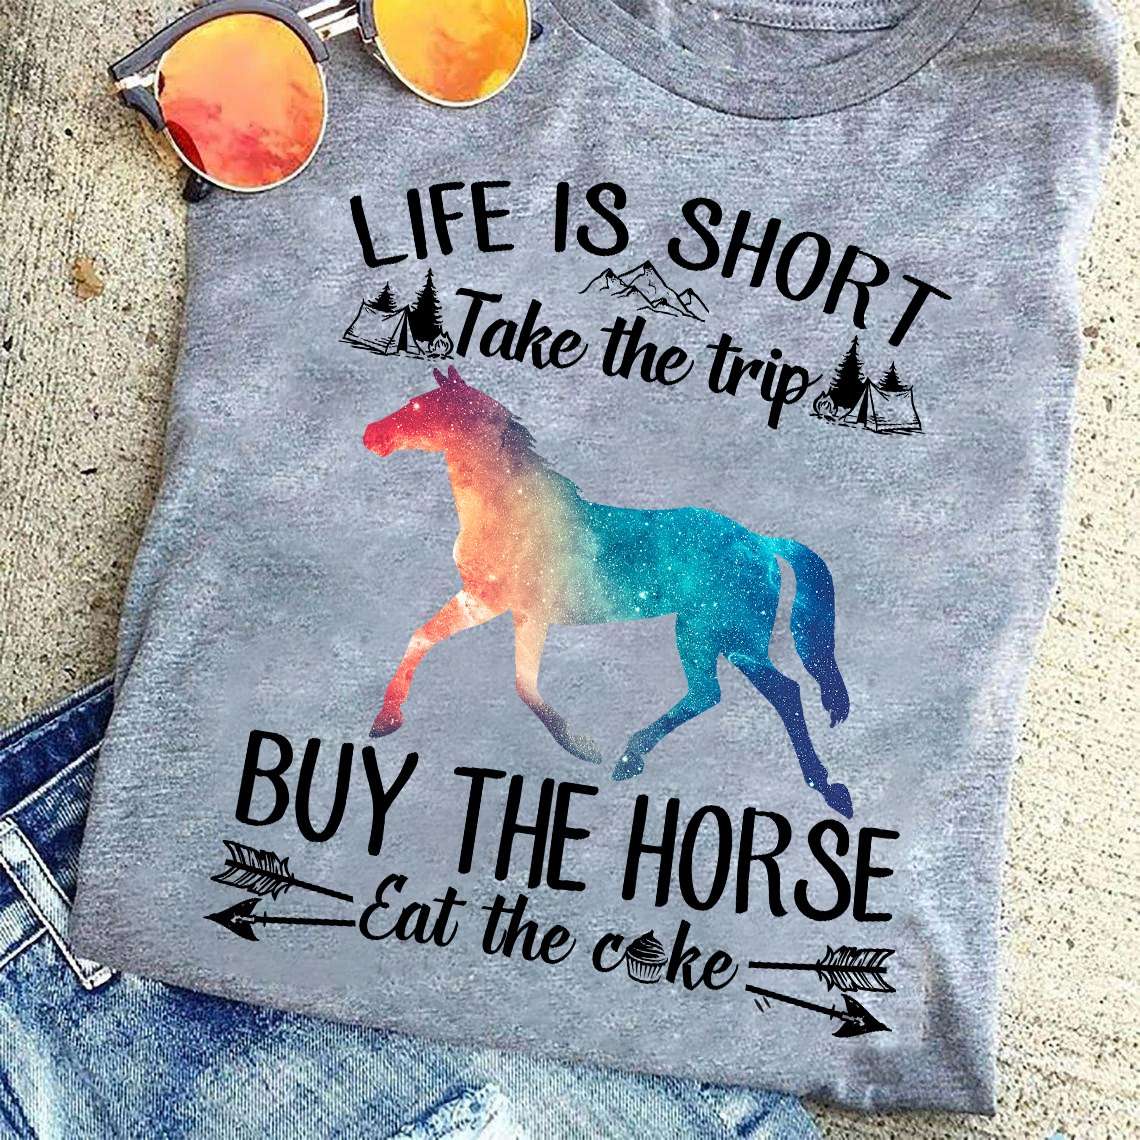 The Horse Tees Gifts - Life is short take the trip buy the horse eat the cake